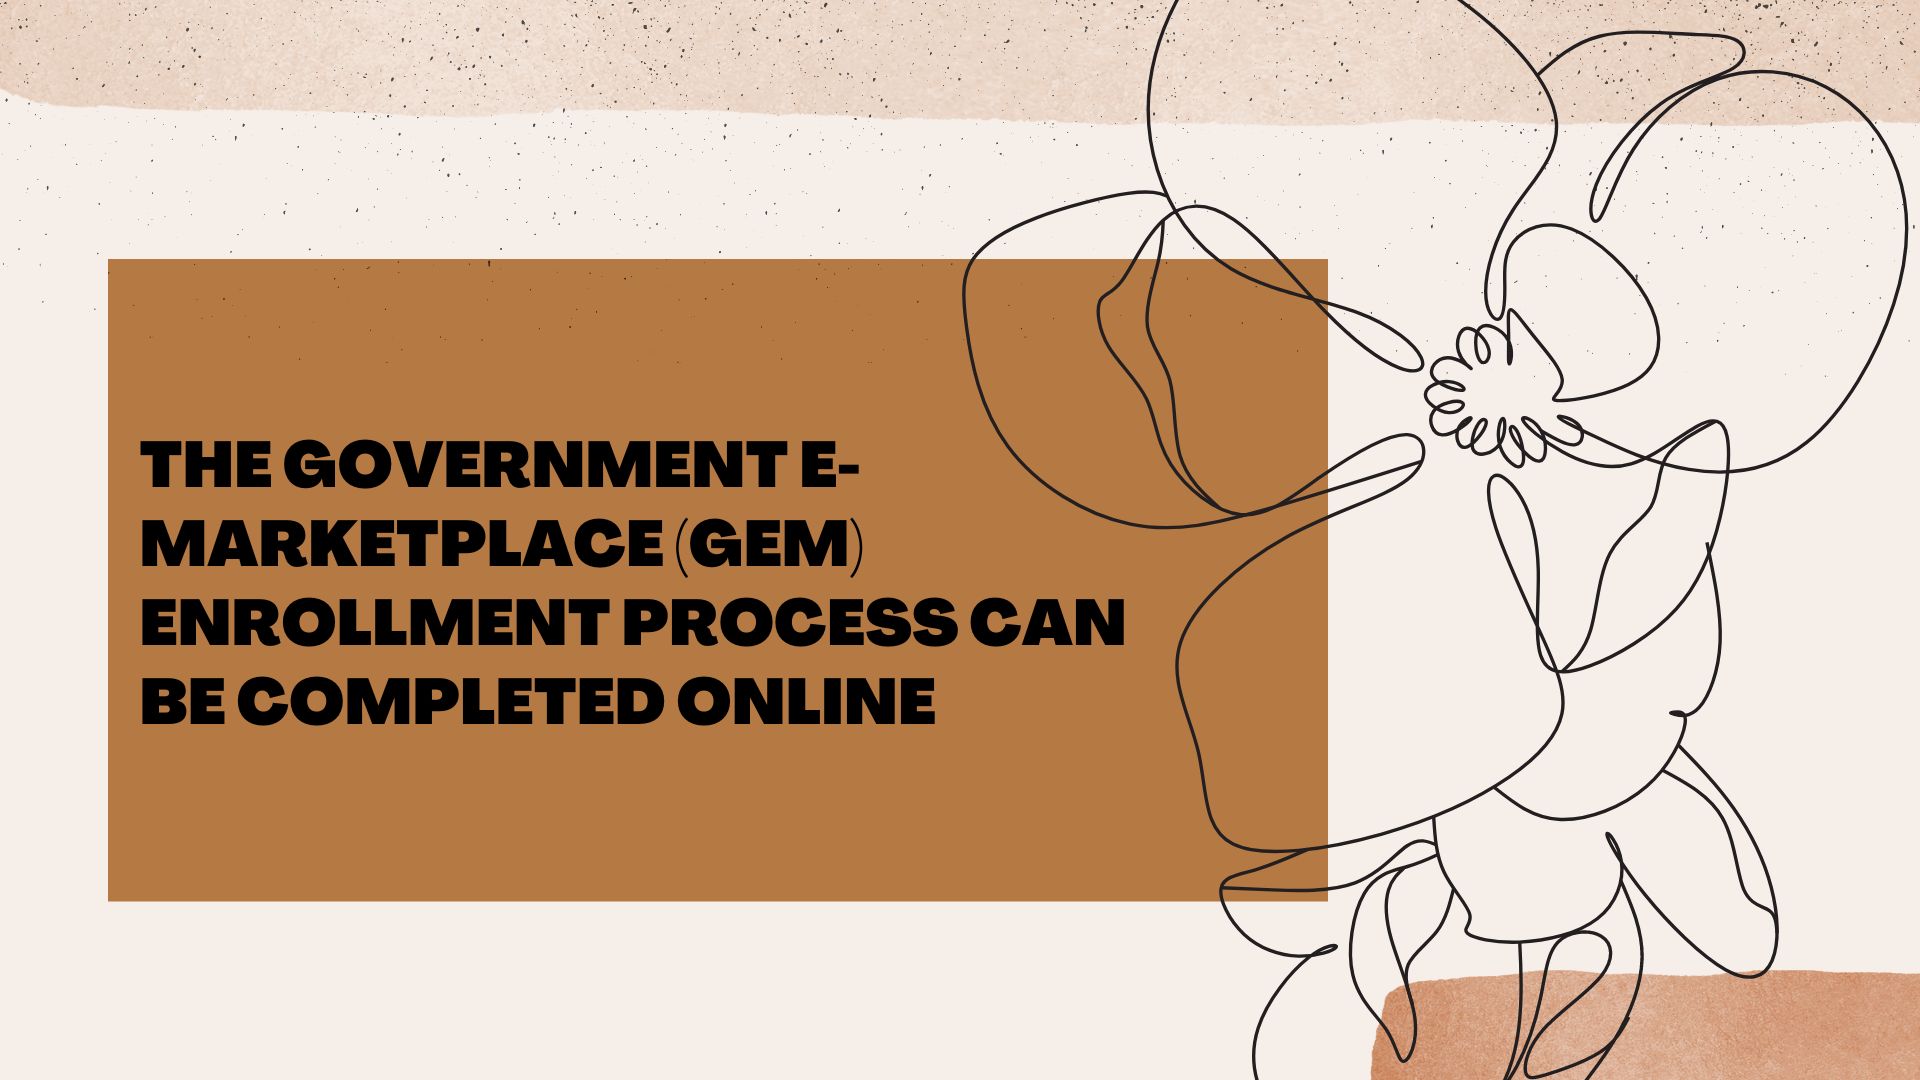 The government e-marketplace (GeM) enrollment process can be completed online